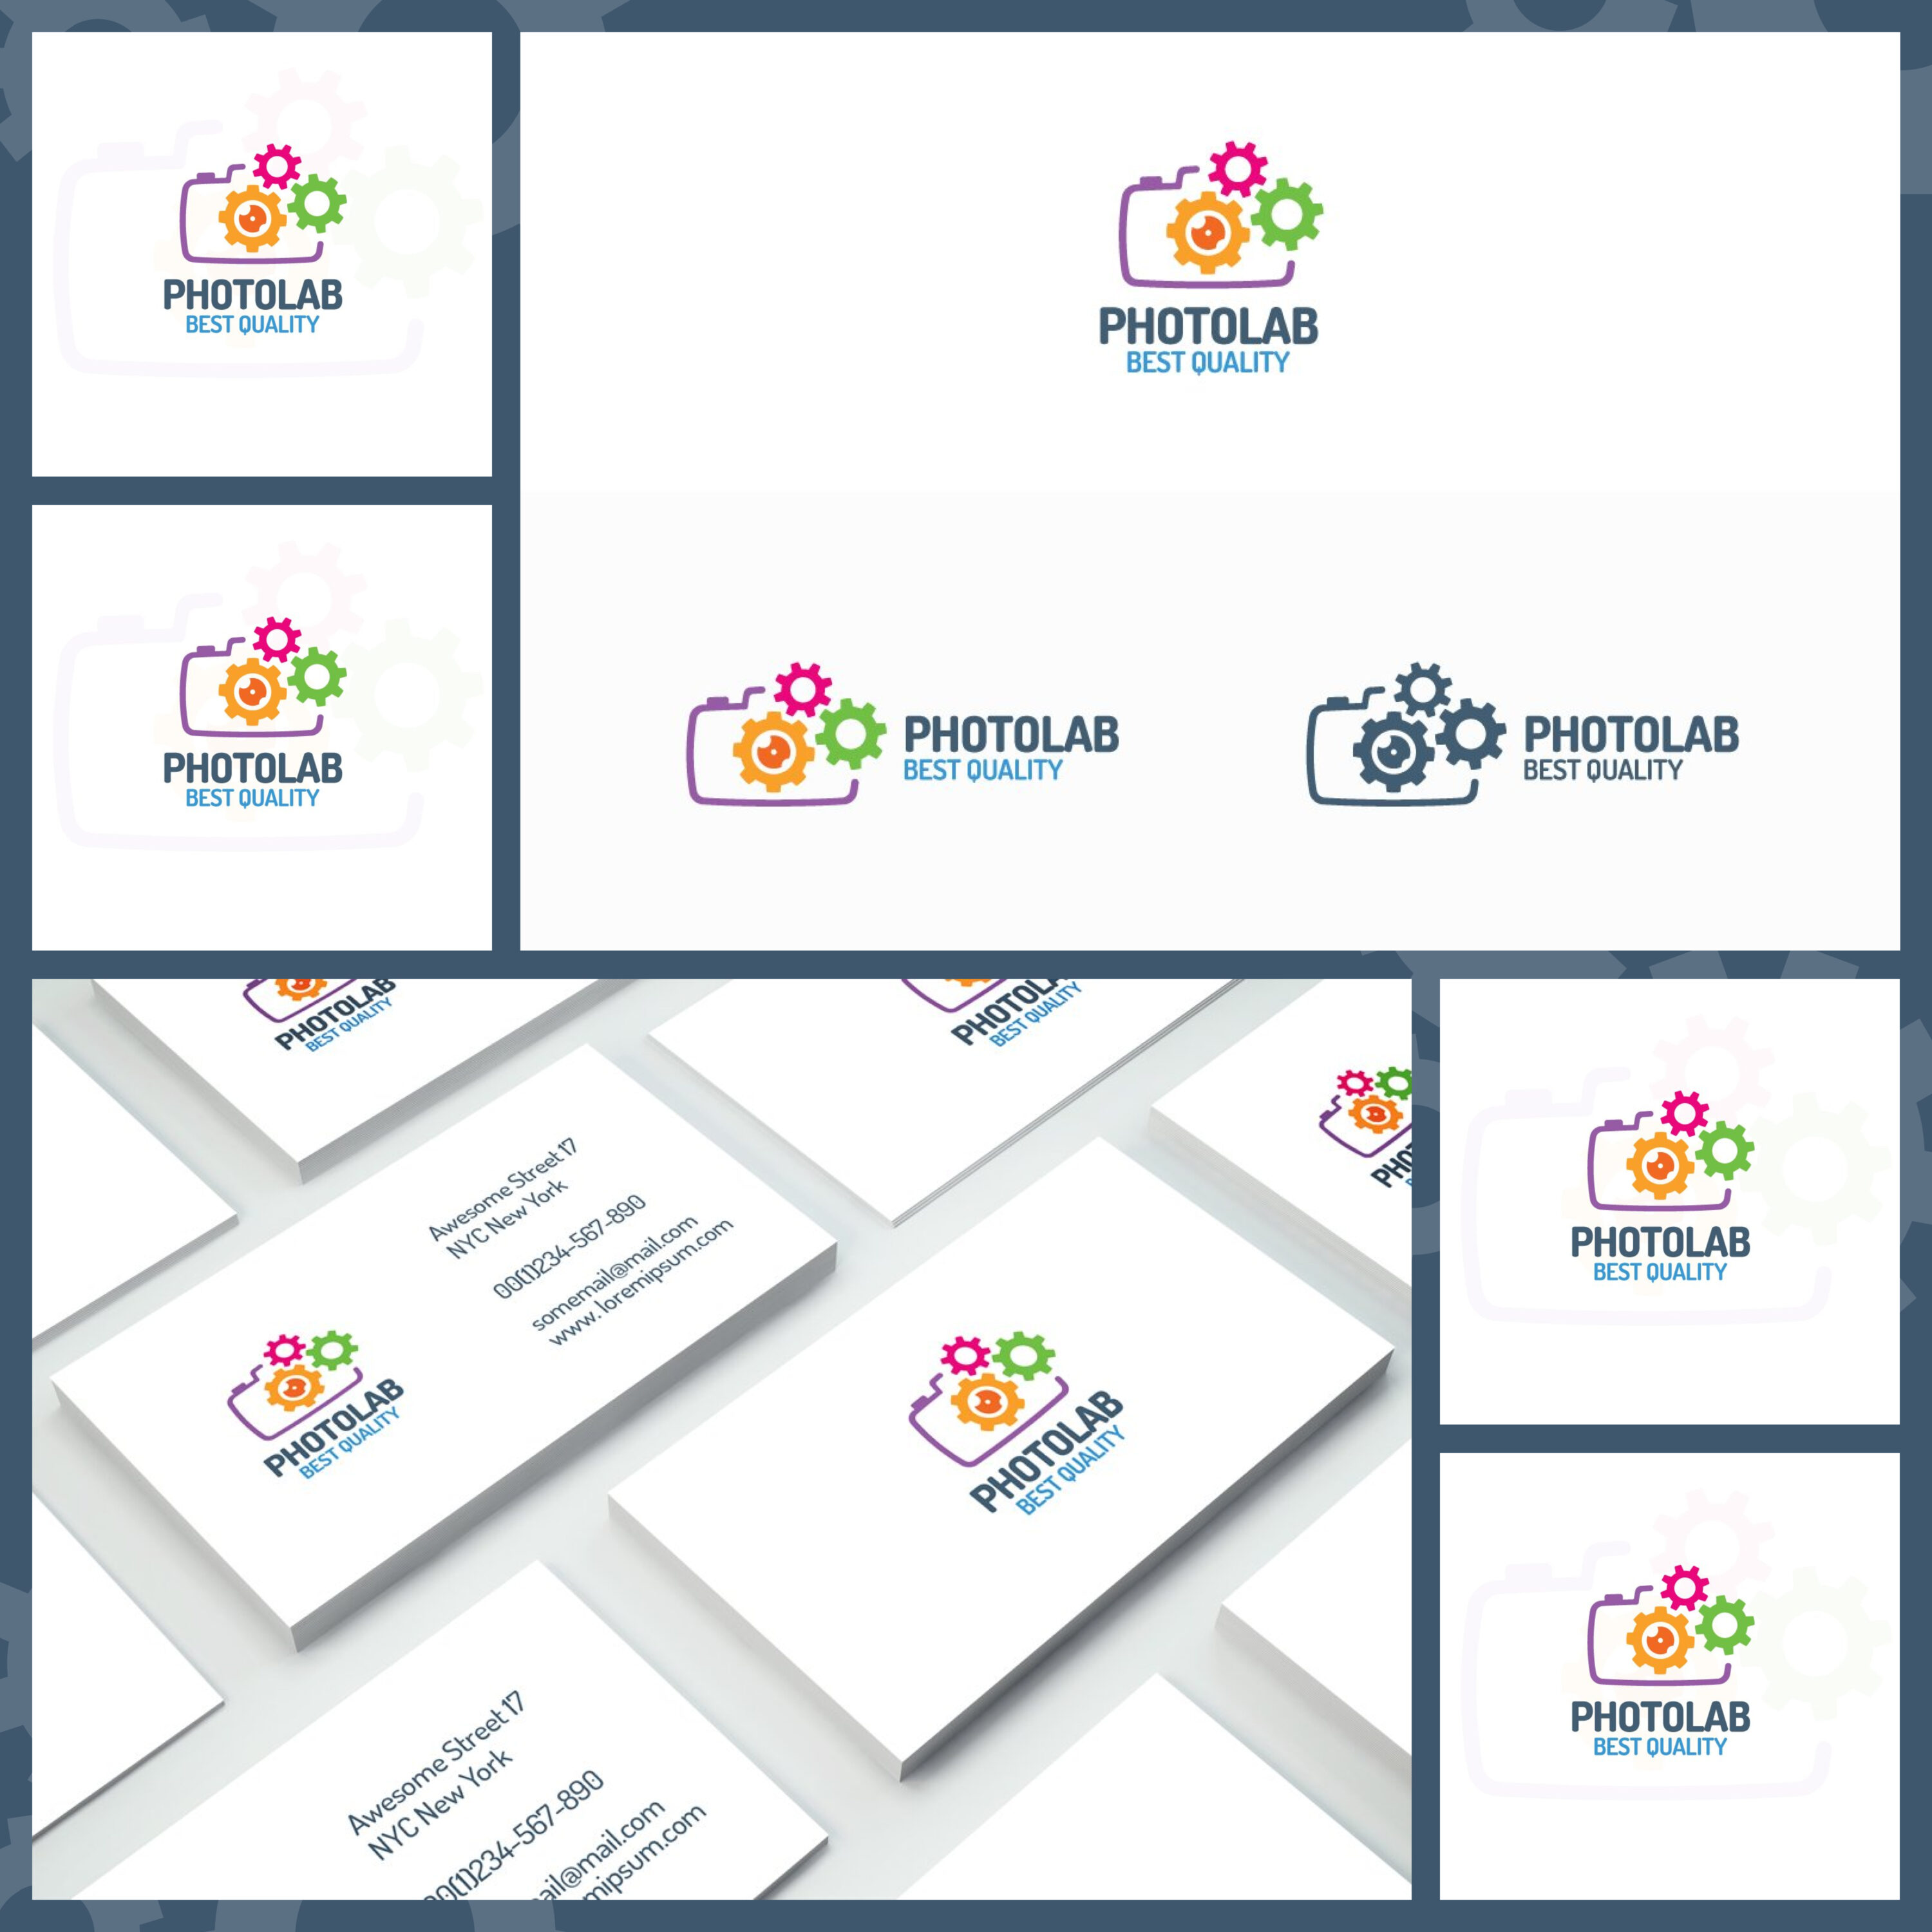 Preview illustrations photolab logo.